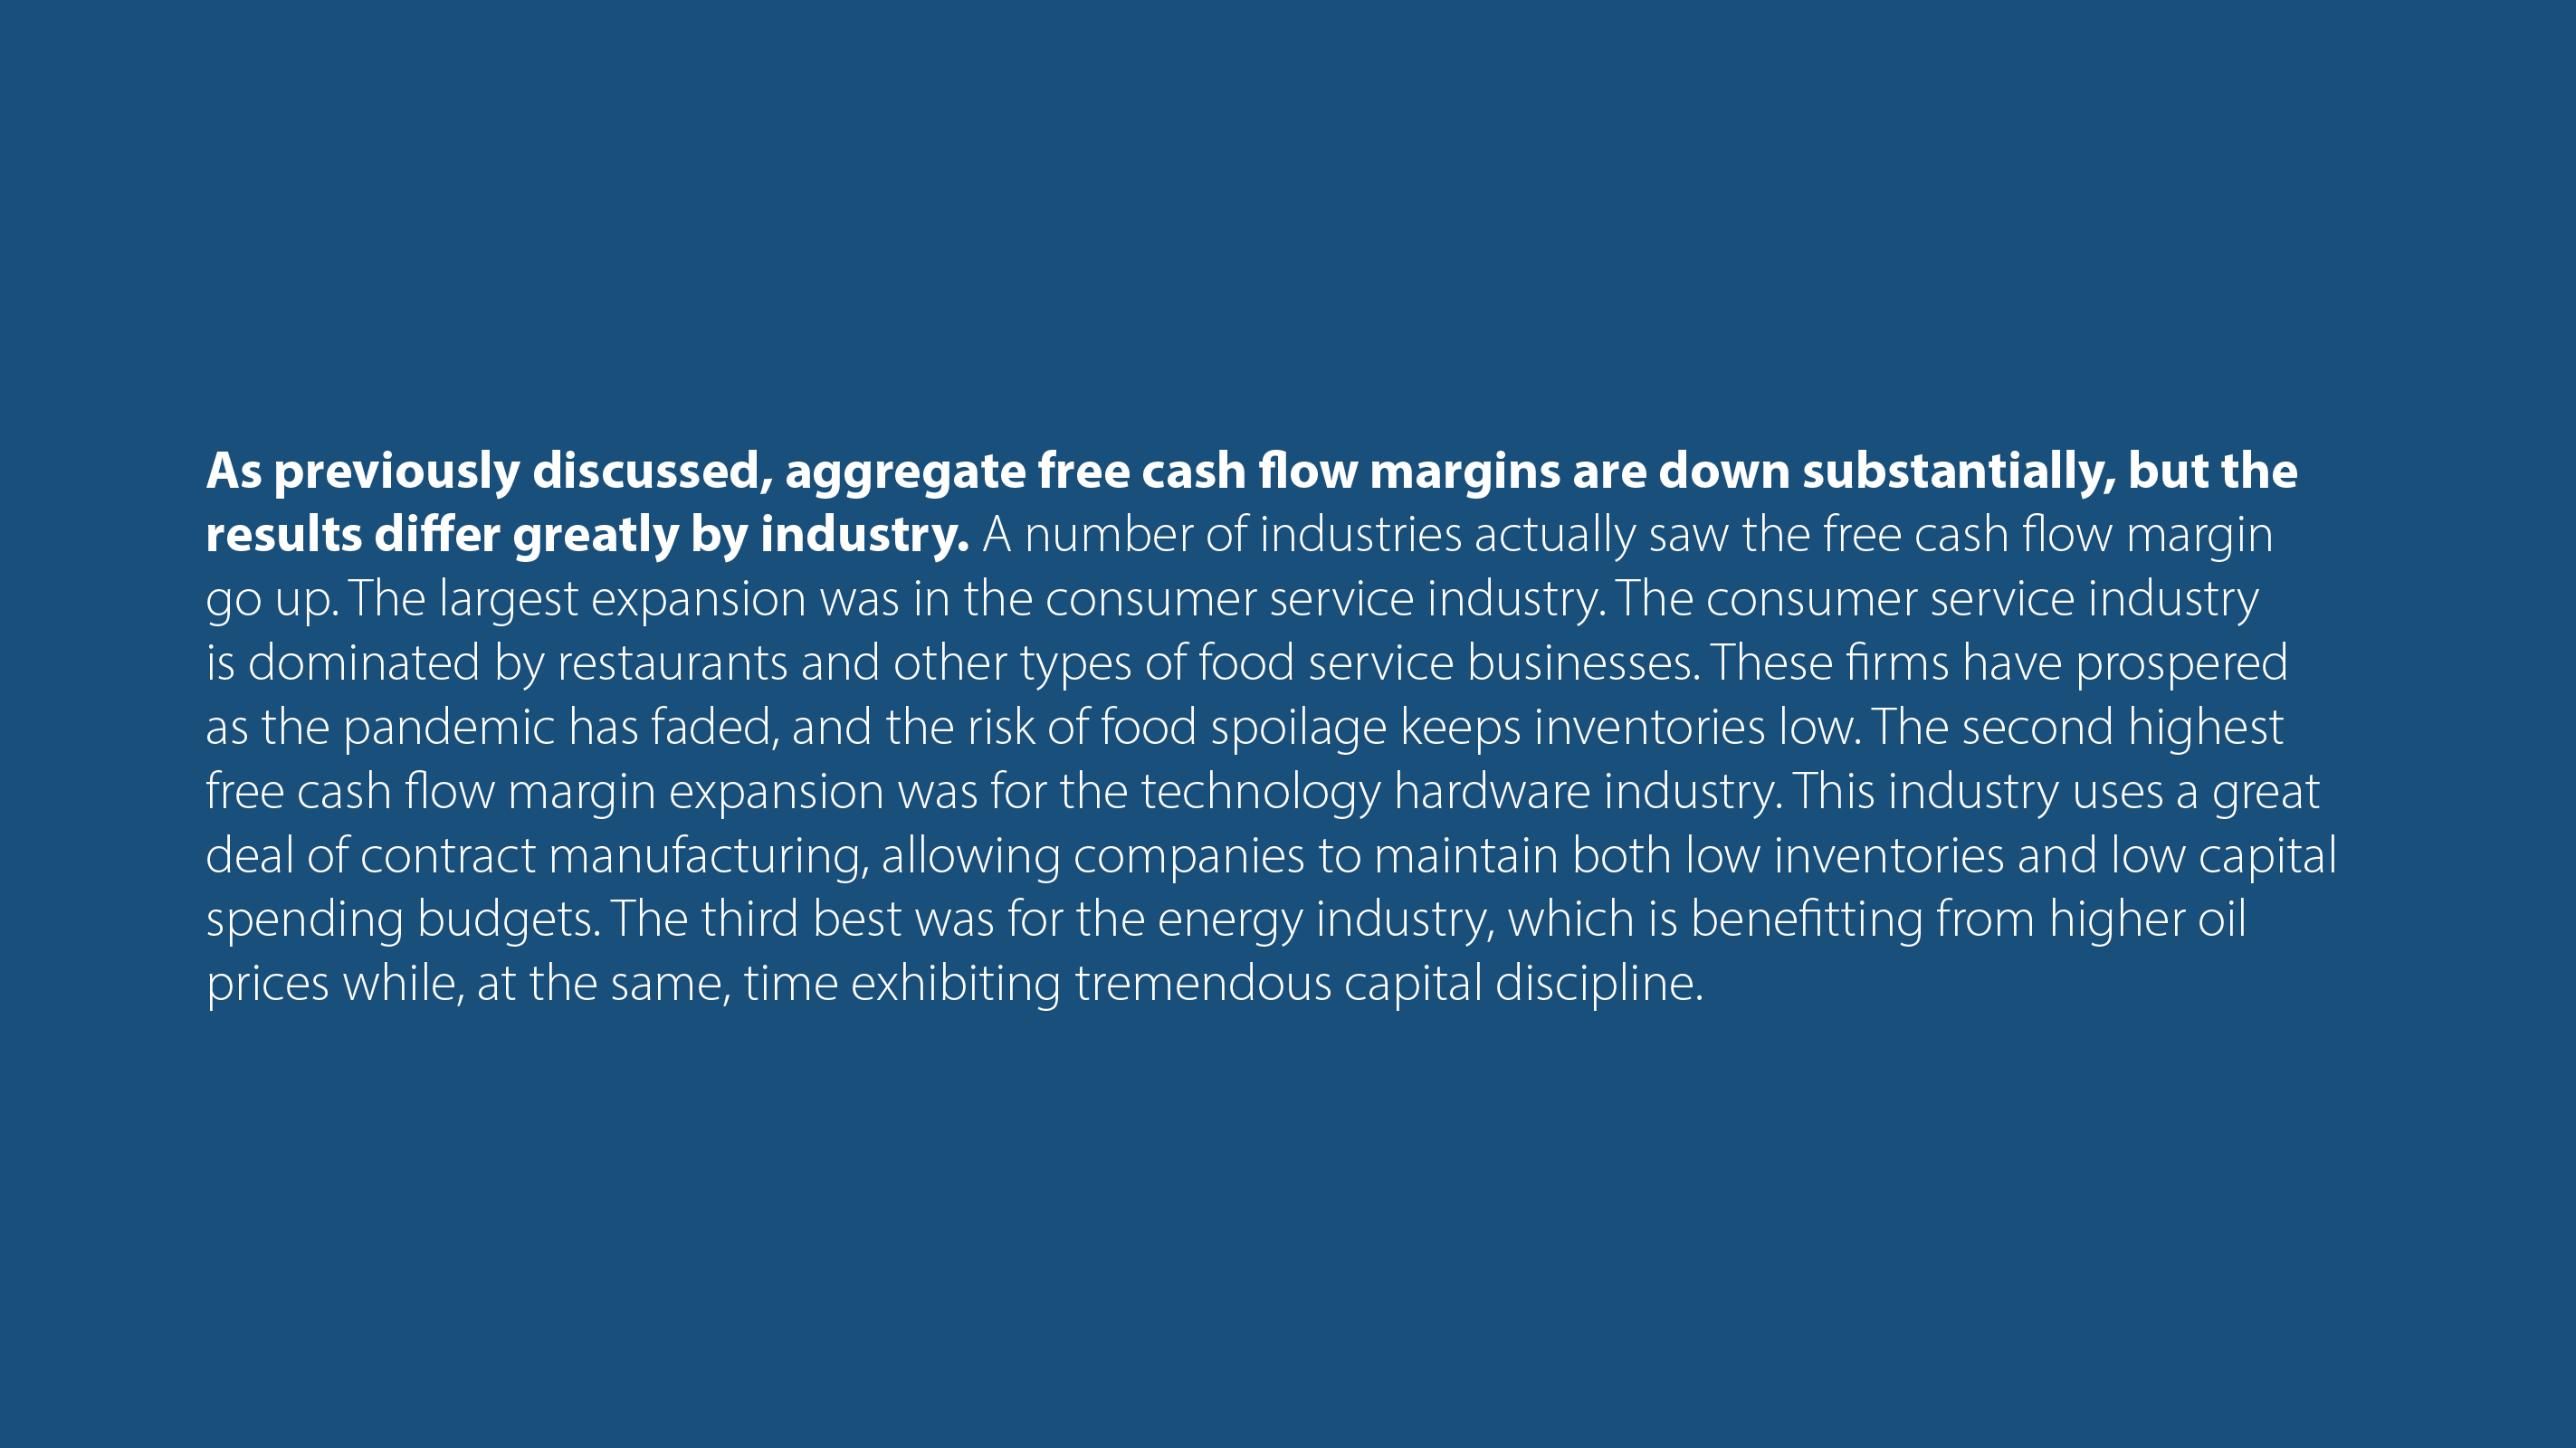 As previously discussed, aggregate free cash flow margins are down substantially